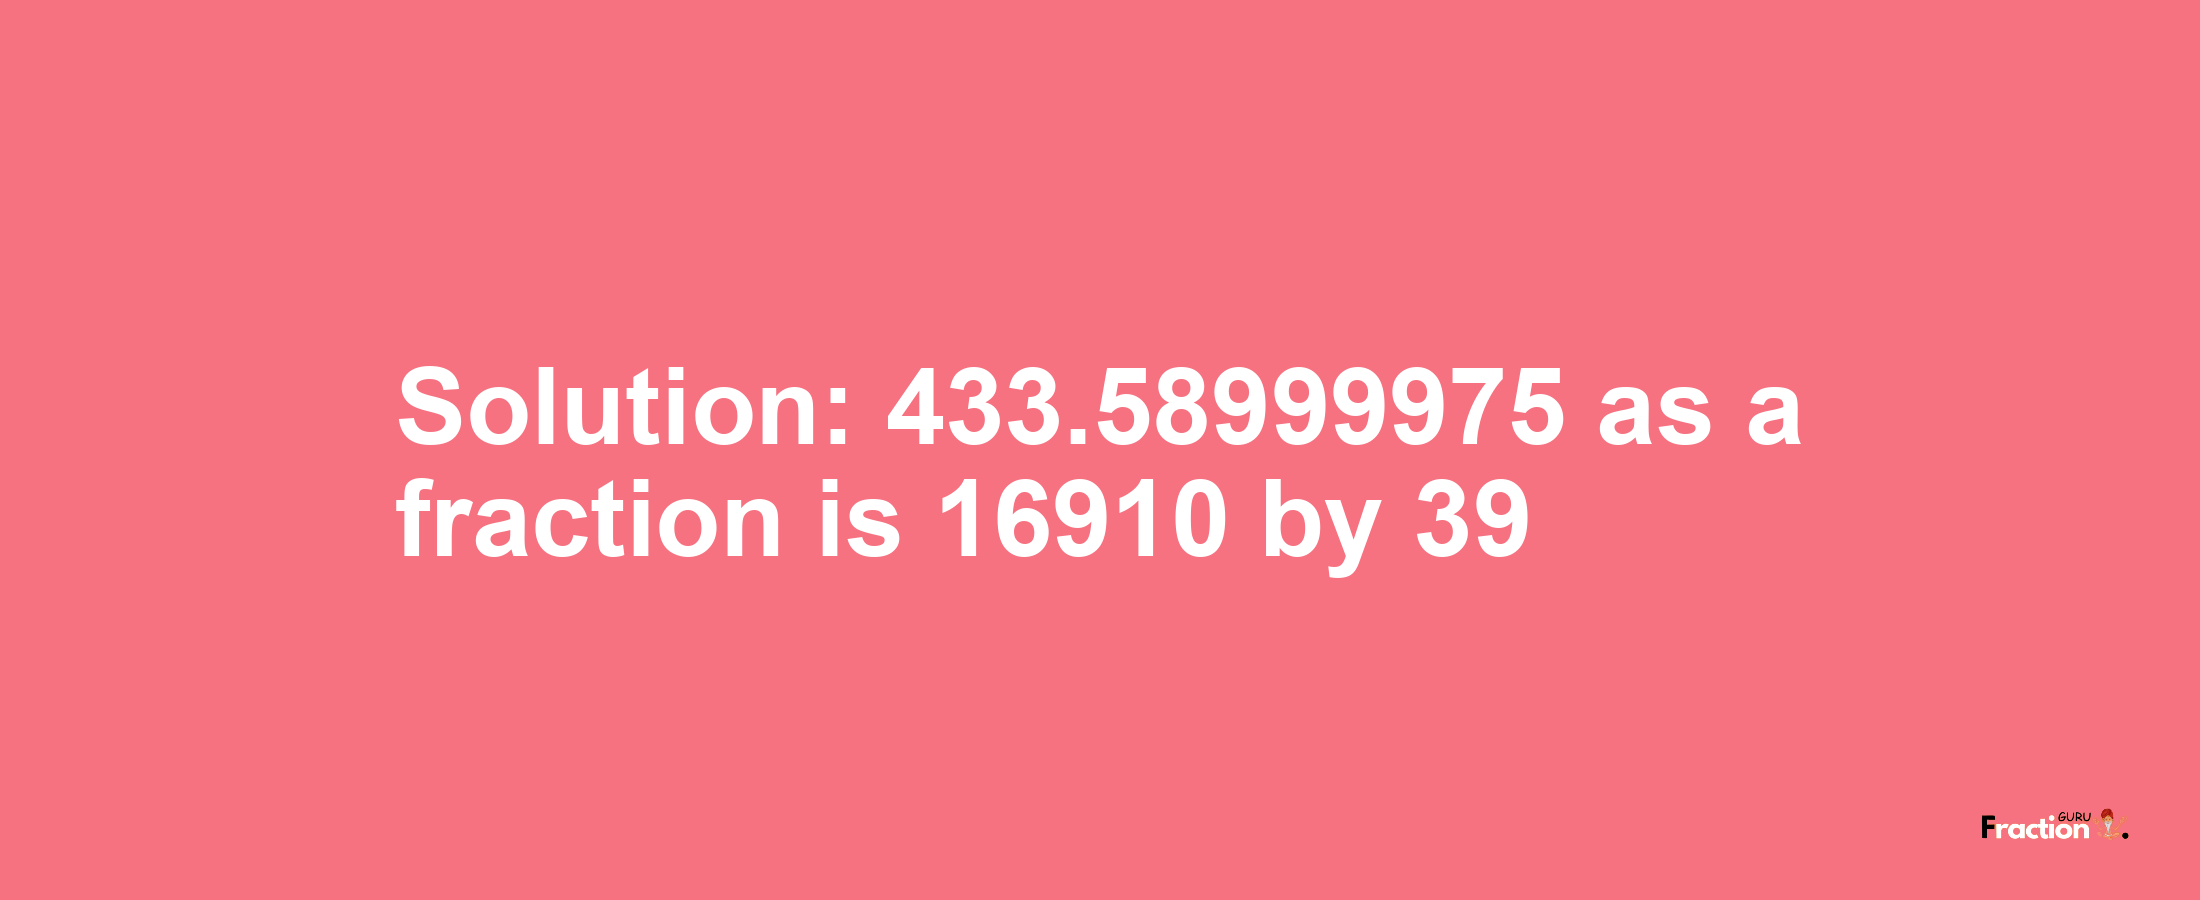 Solution:433.58999975 as a fraction is 16910/39